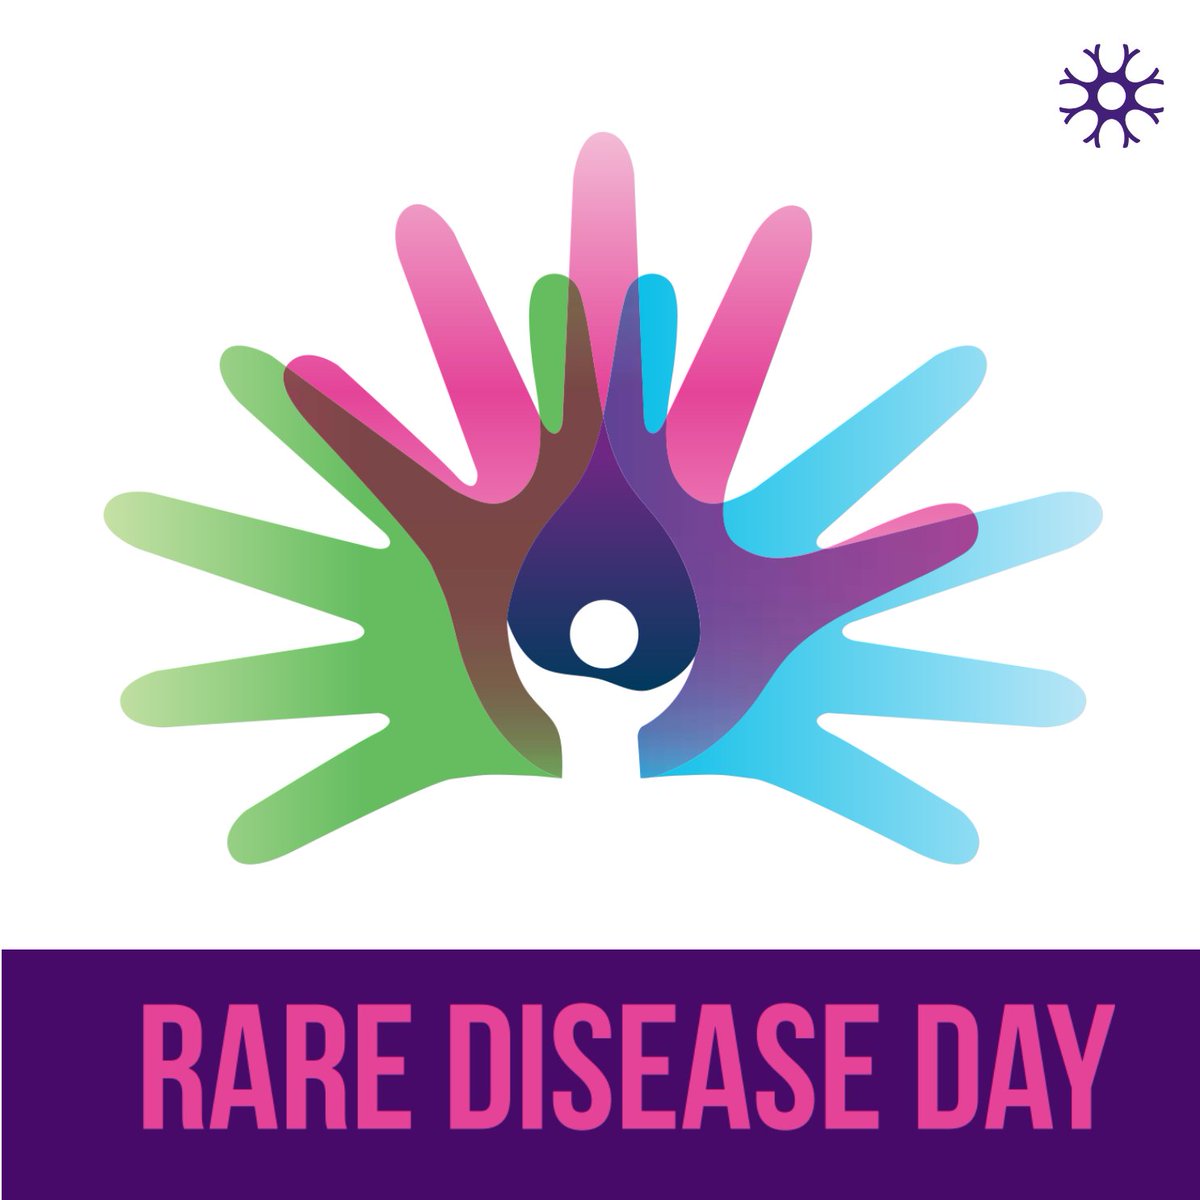 All #rarediseases should be treatable. Working towards effective therapies is essential. Each year, NeuroCRU adds new conditions to its list of trials, like #MOGAD, #FSHD, #Huntingtons and #CJD. Patients deserve the option of accessing investigational treatments. #RareDiseaseDay